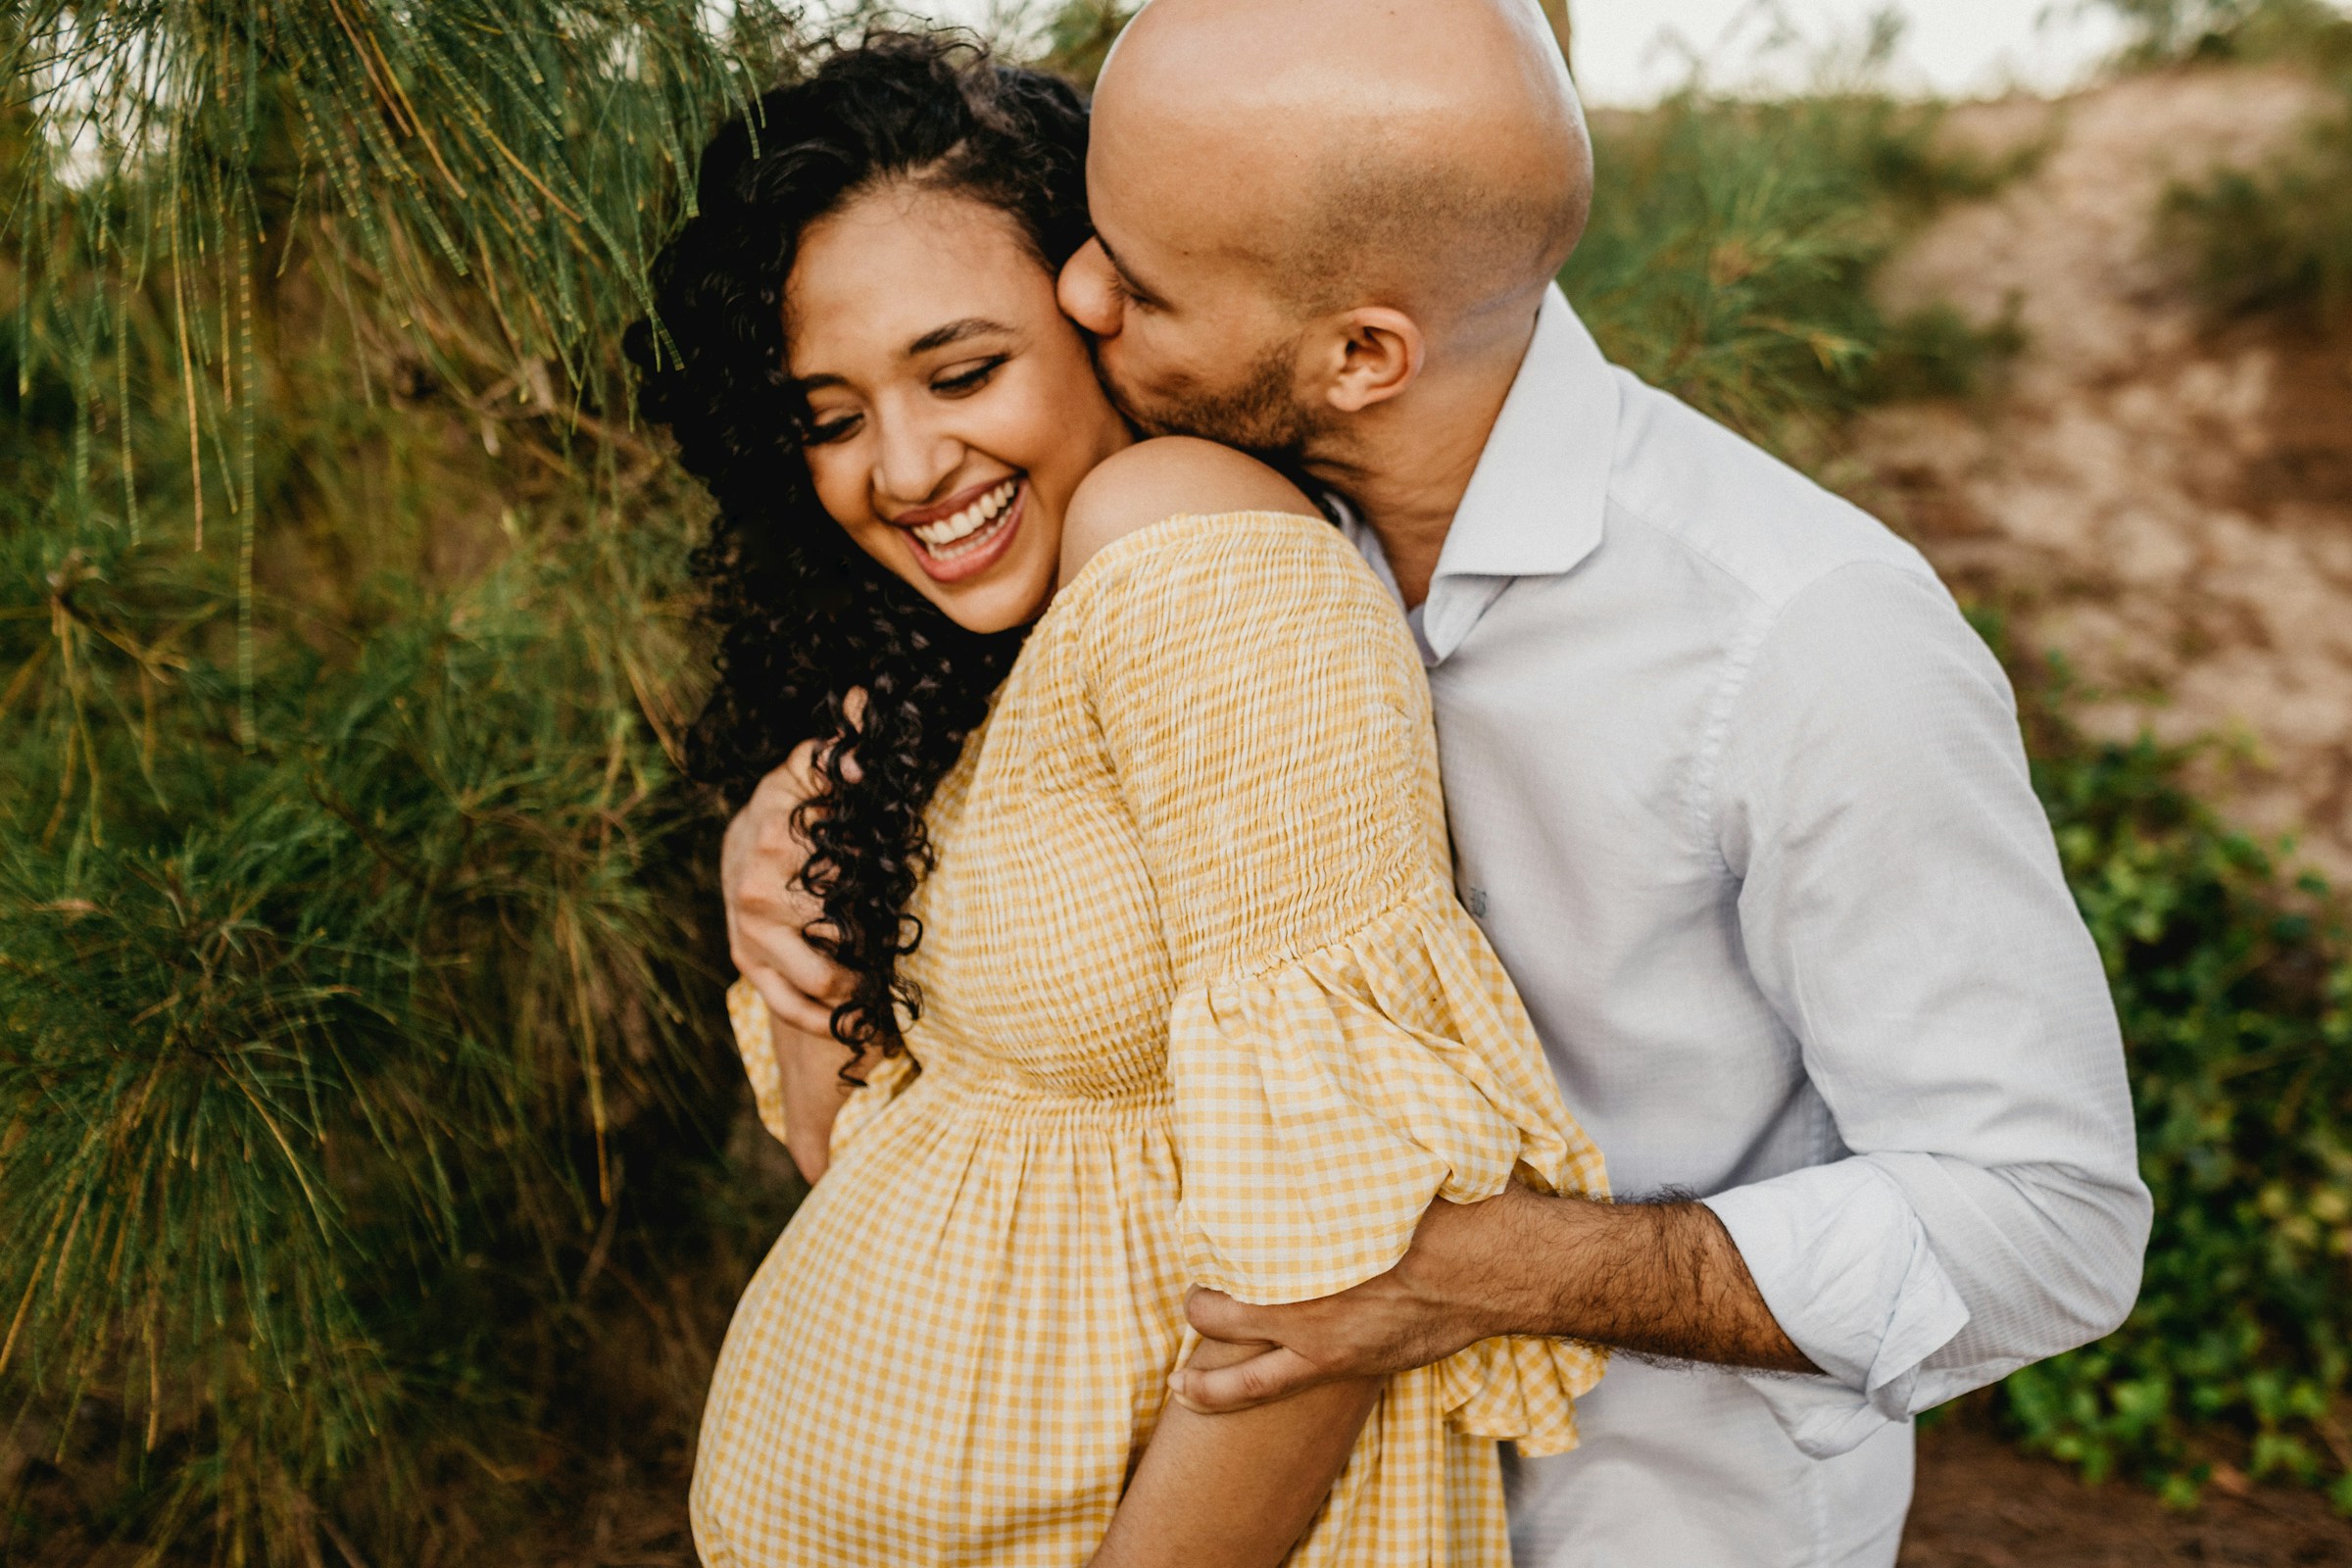 Pregnant couple hugging and kissing | Source: Unsplash